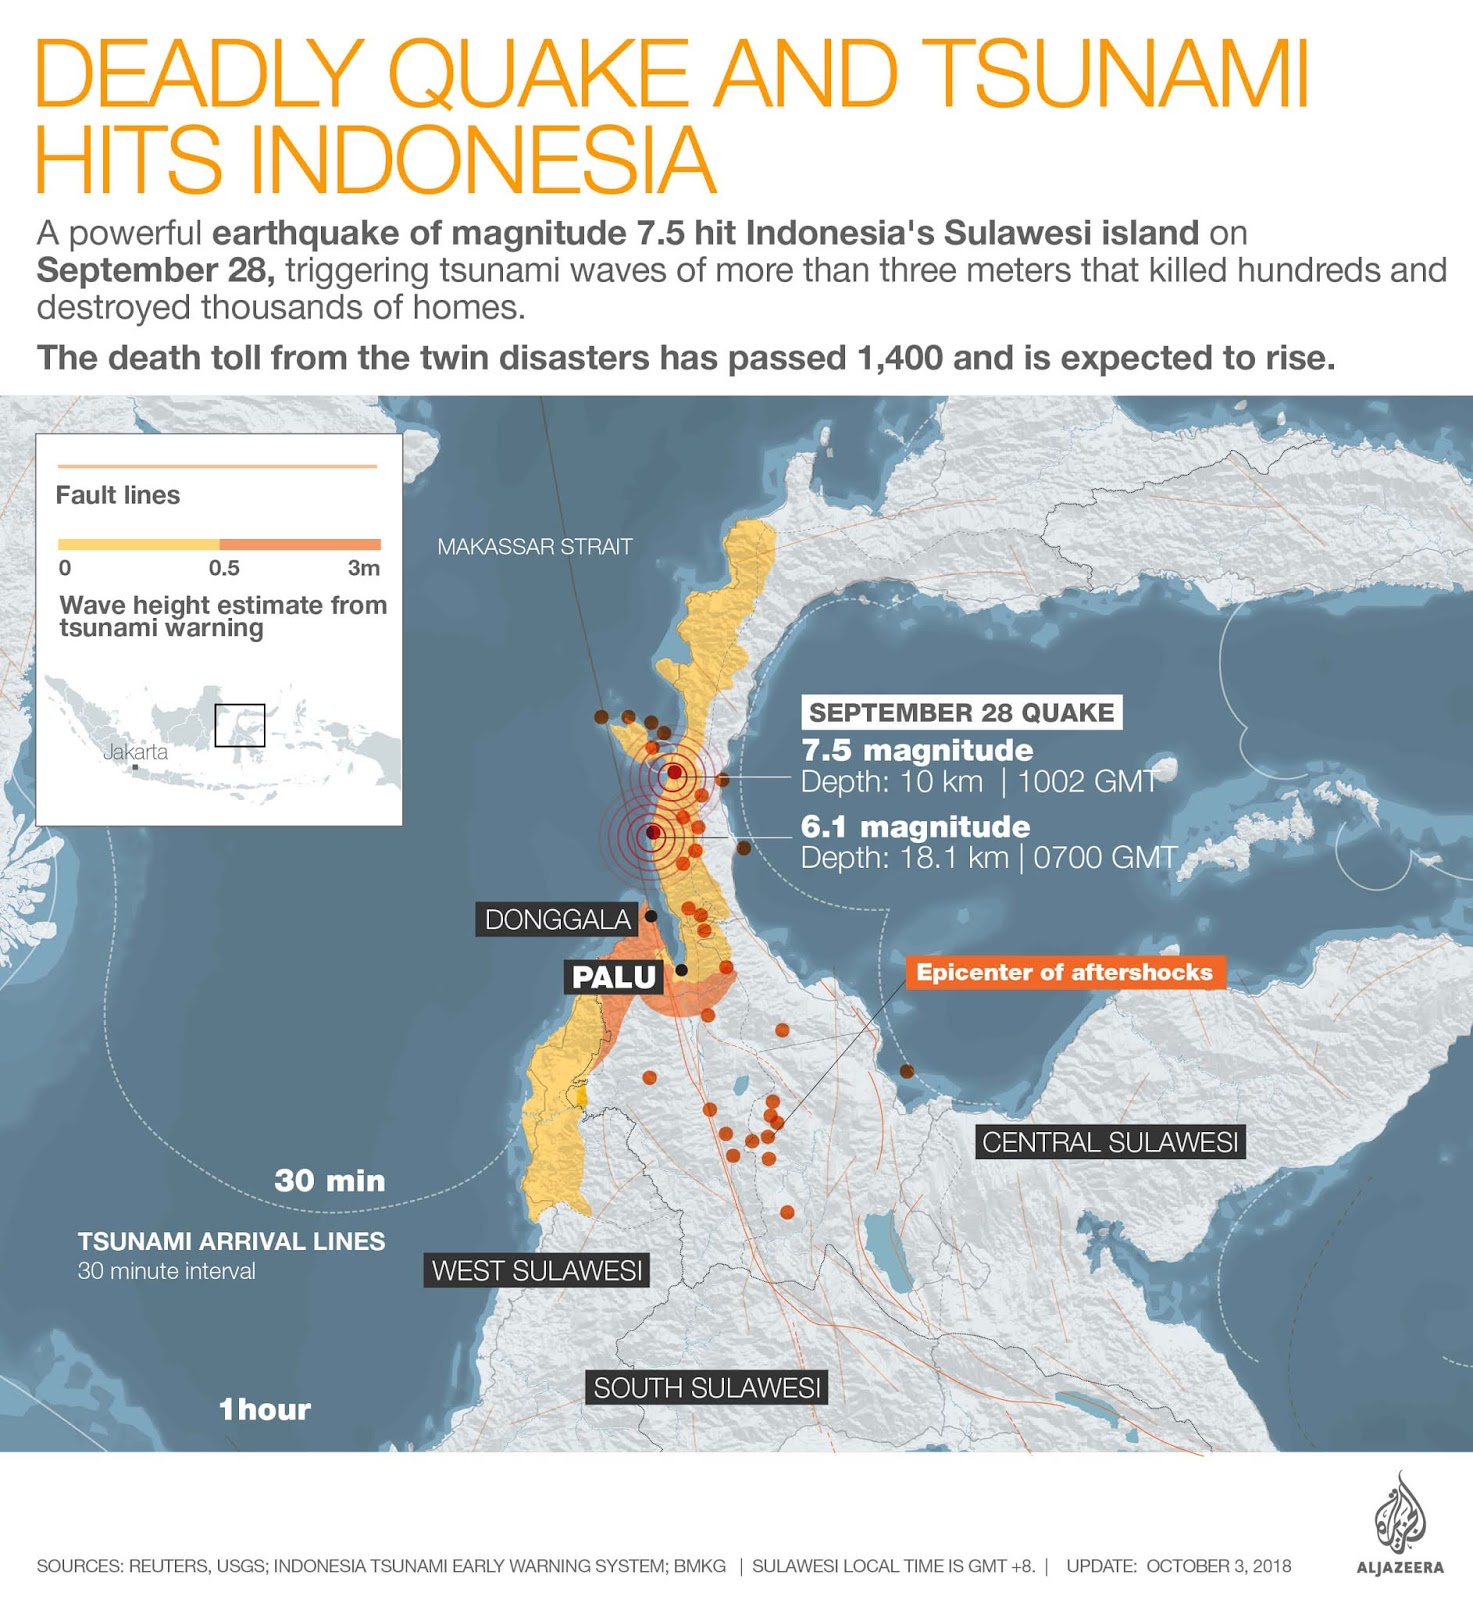 This Tsunami Hit Indonesia, Costing The Lives Of Over 1400 People, And Now A Volcano Has Just Erupted